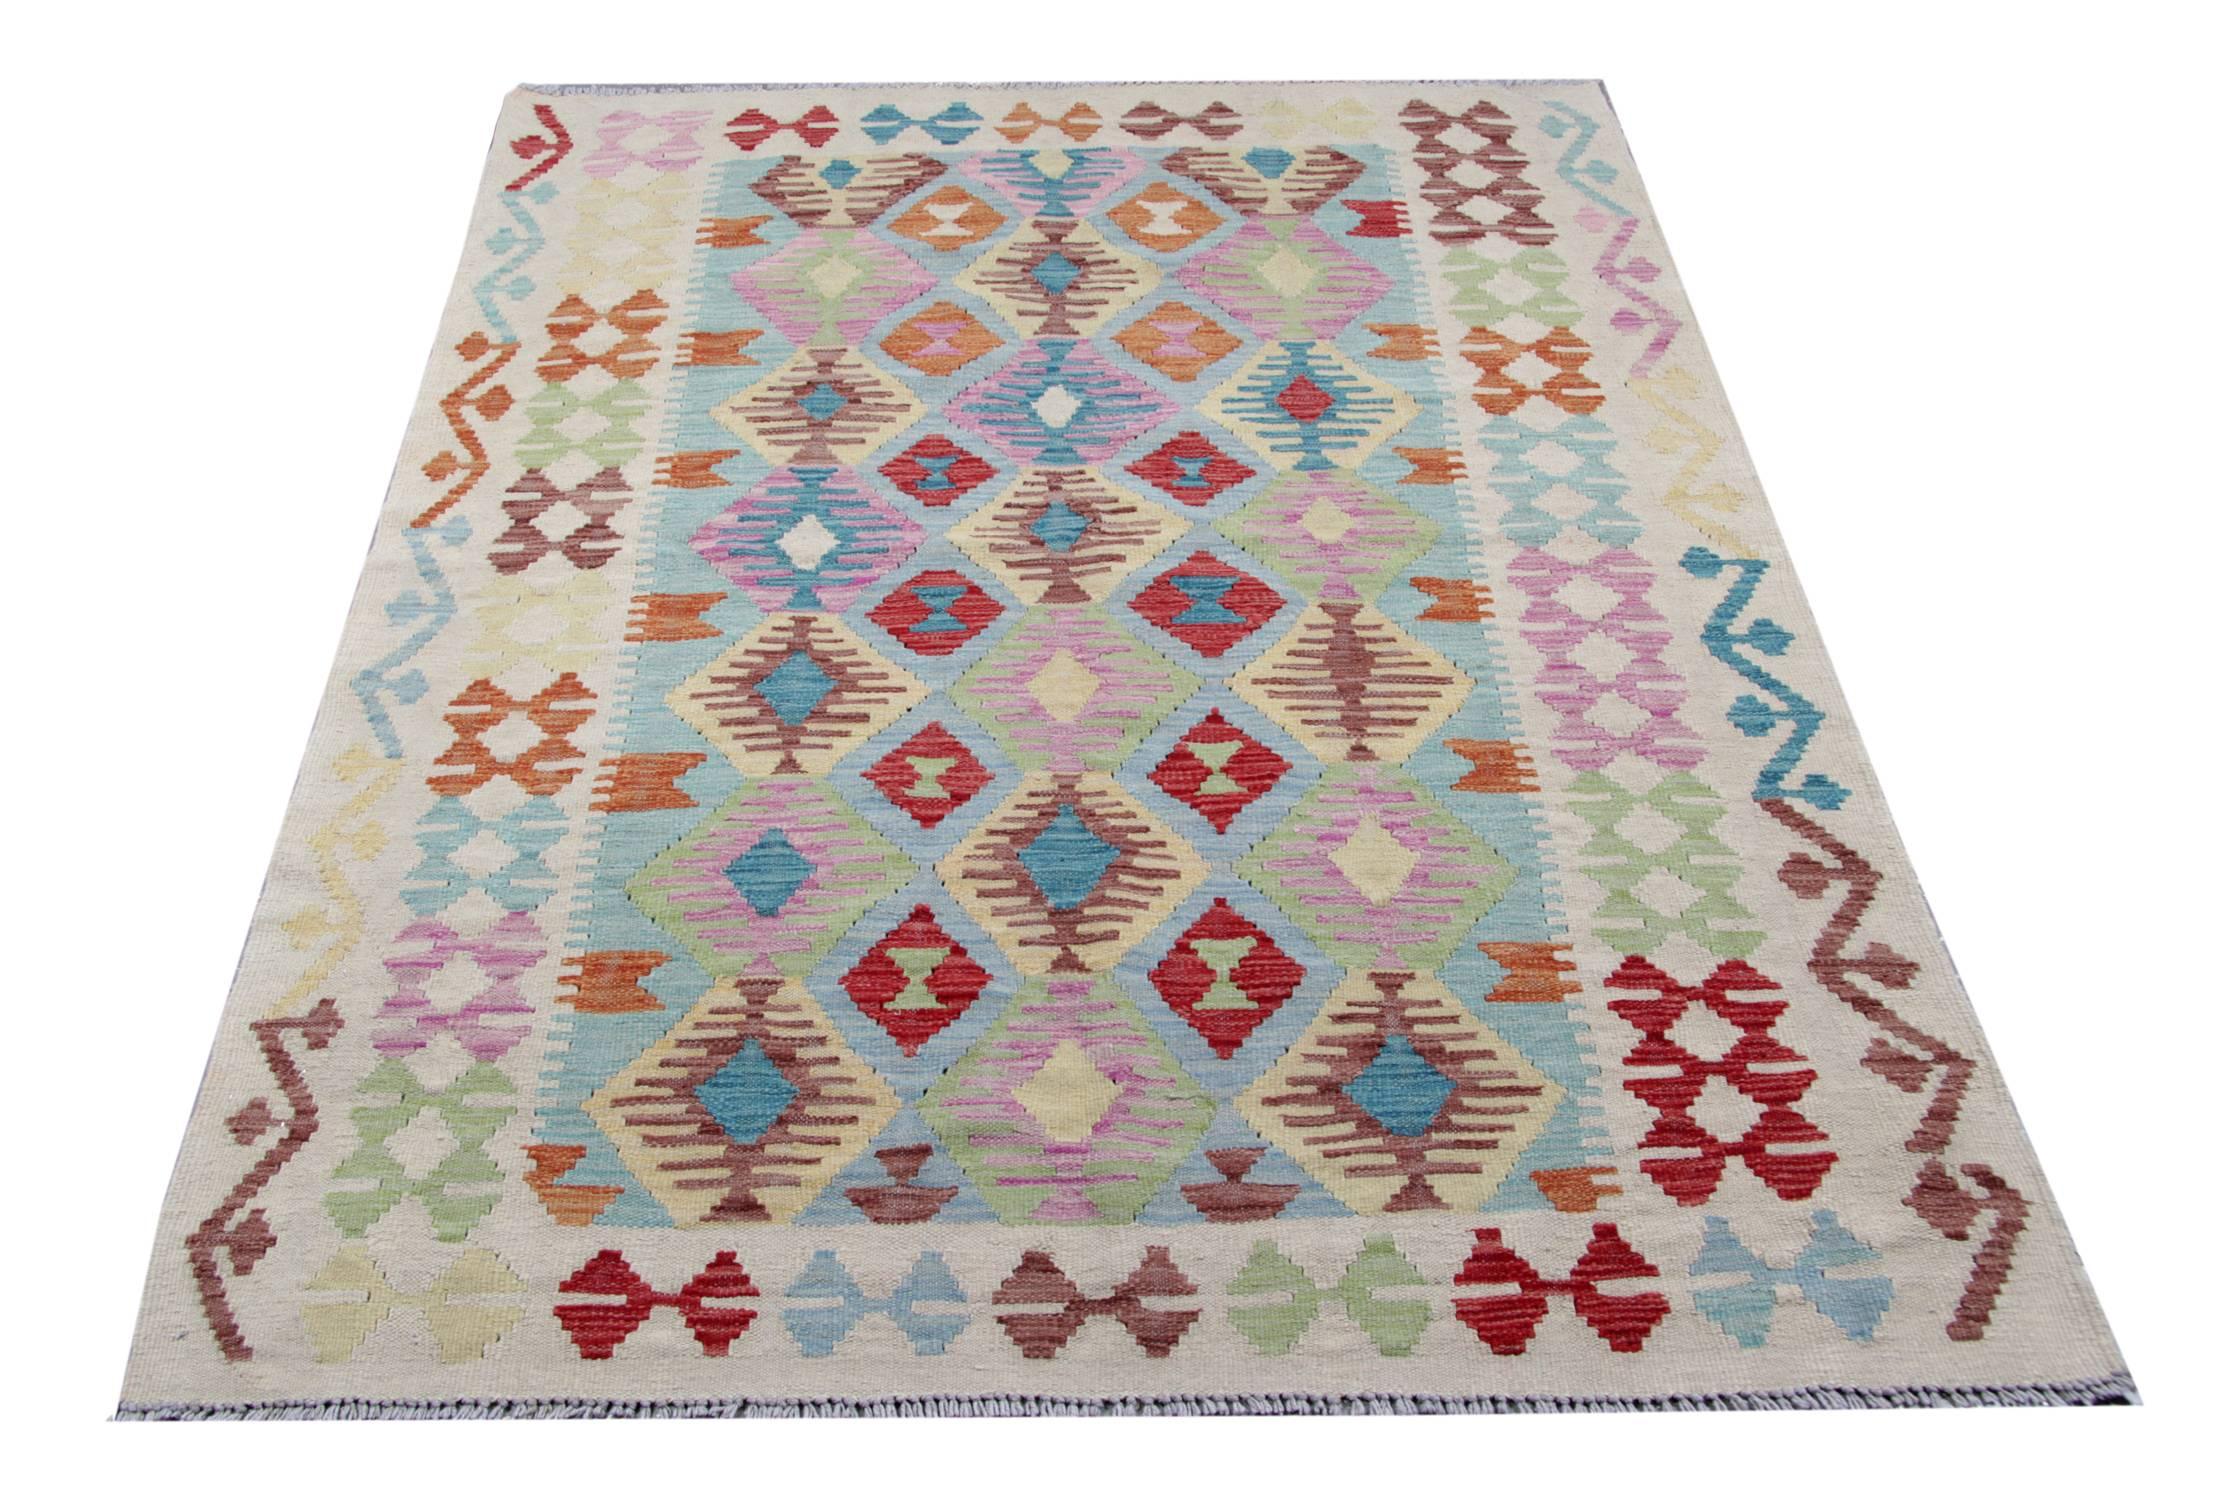 The flat wave rug shows a tribal rug design deriving from the tribes. The geometric rug has been handmade in the North of Afghanistan by Uzbek and Turkmen tribes by using local wool and cotton. The quality of the woven rug is enhanced by using only